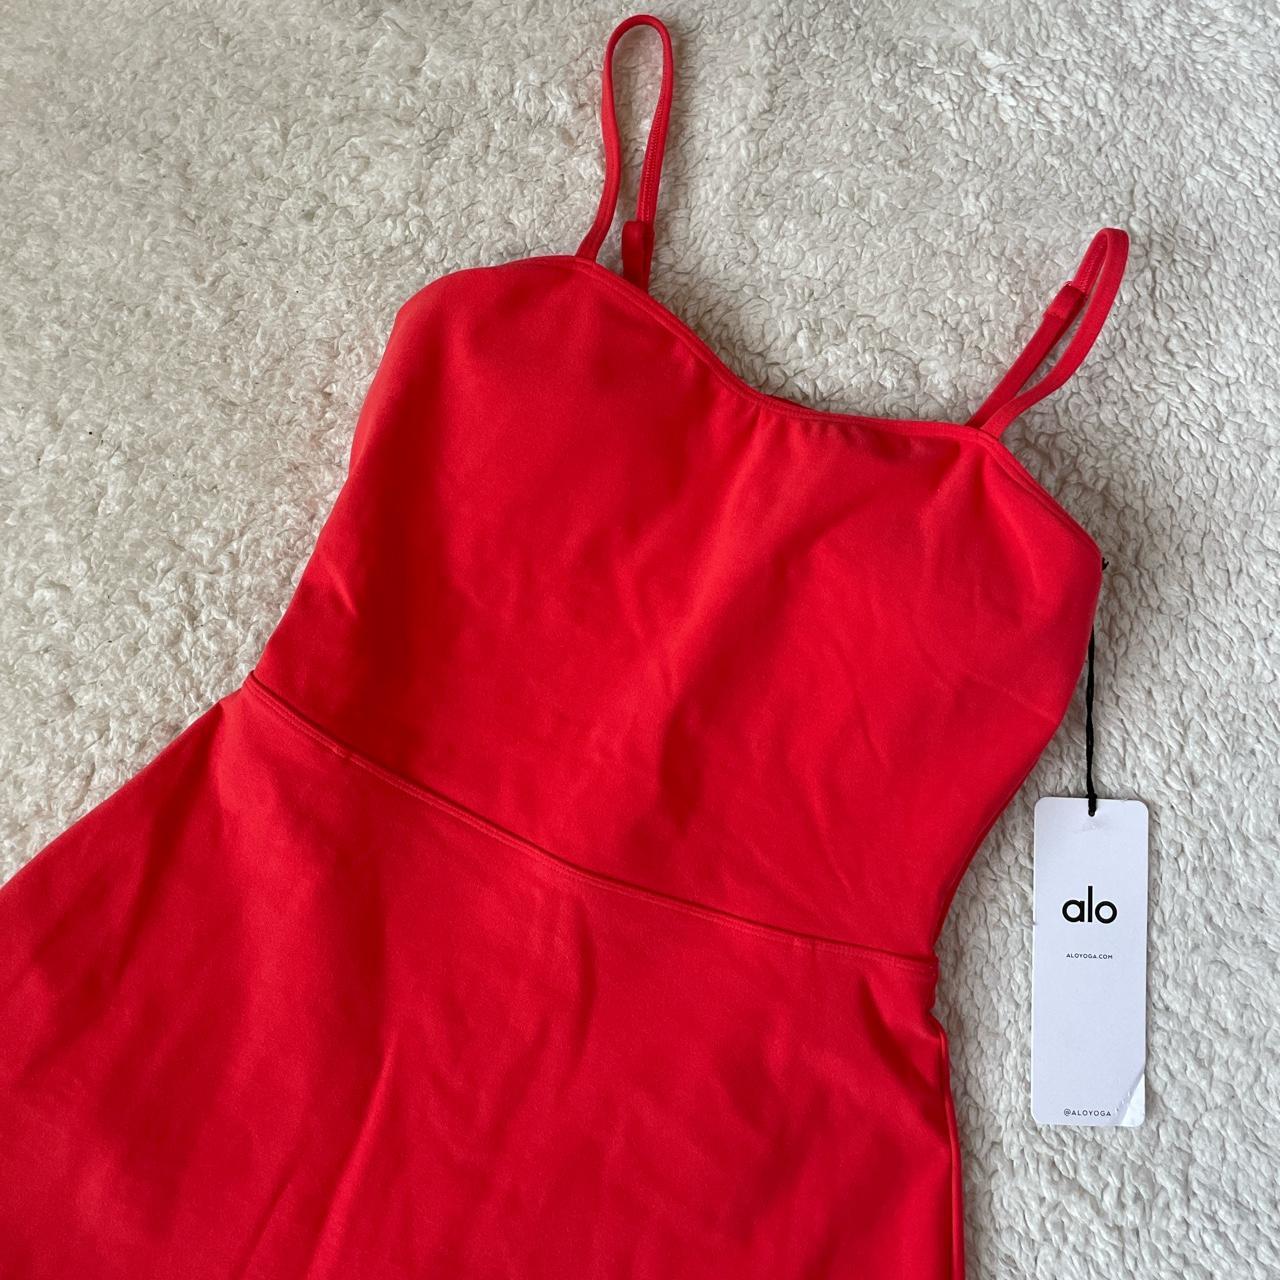 Alo Yoga Courtside Tennis Dress in Red Hot... - Depop